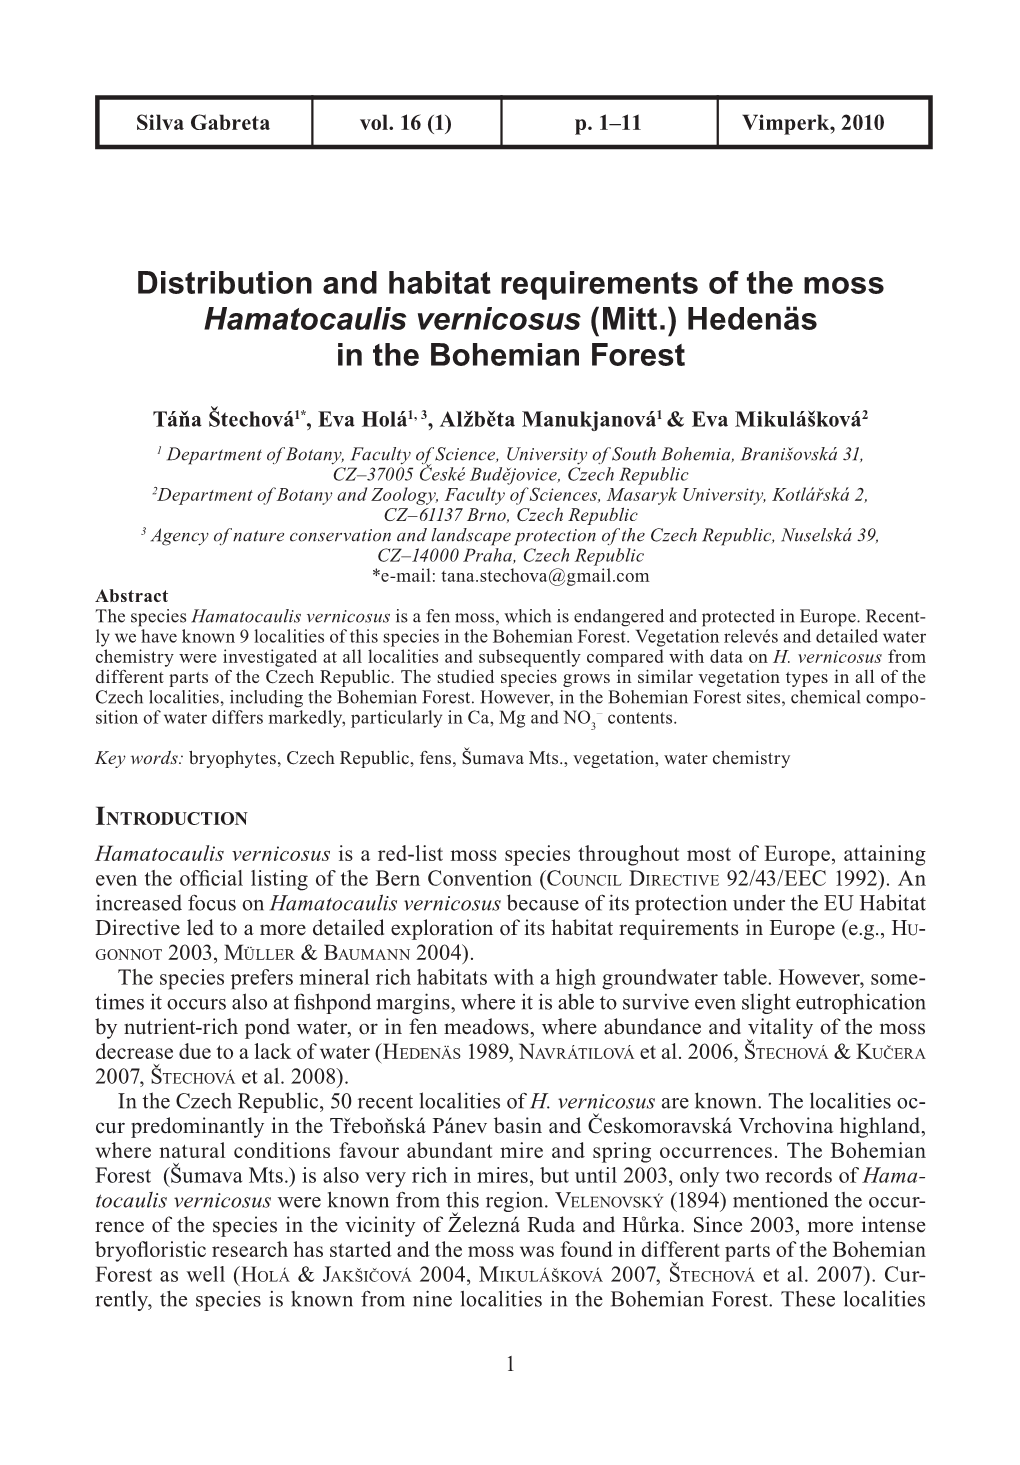 Distribution and Habitat Requirements of the Moss Hamatocaulis Vernicosus (Mitt.) Hedenäs in the Bohemian Forest